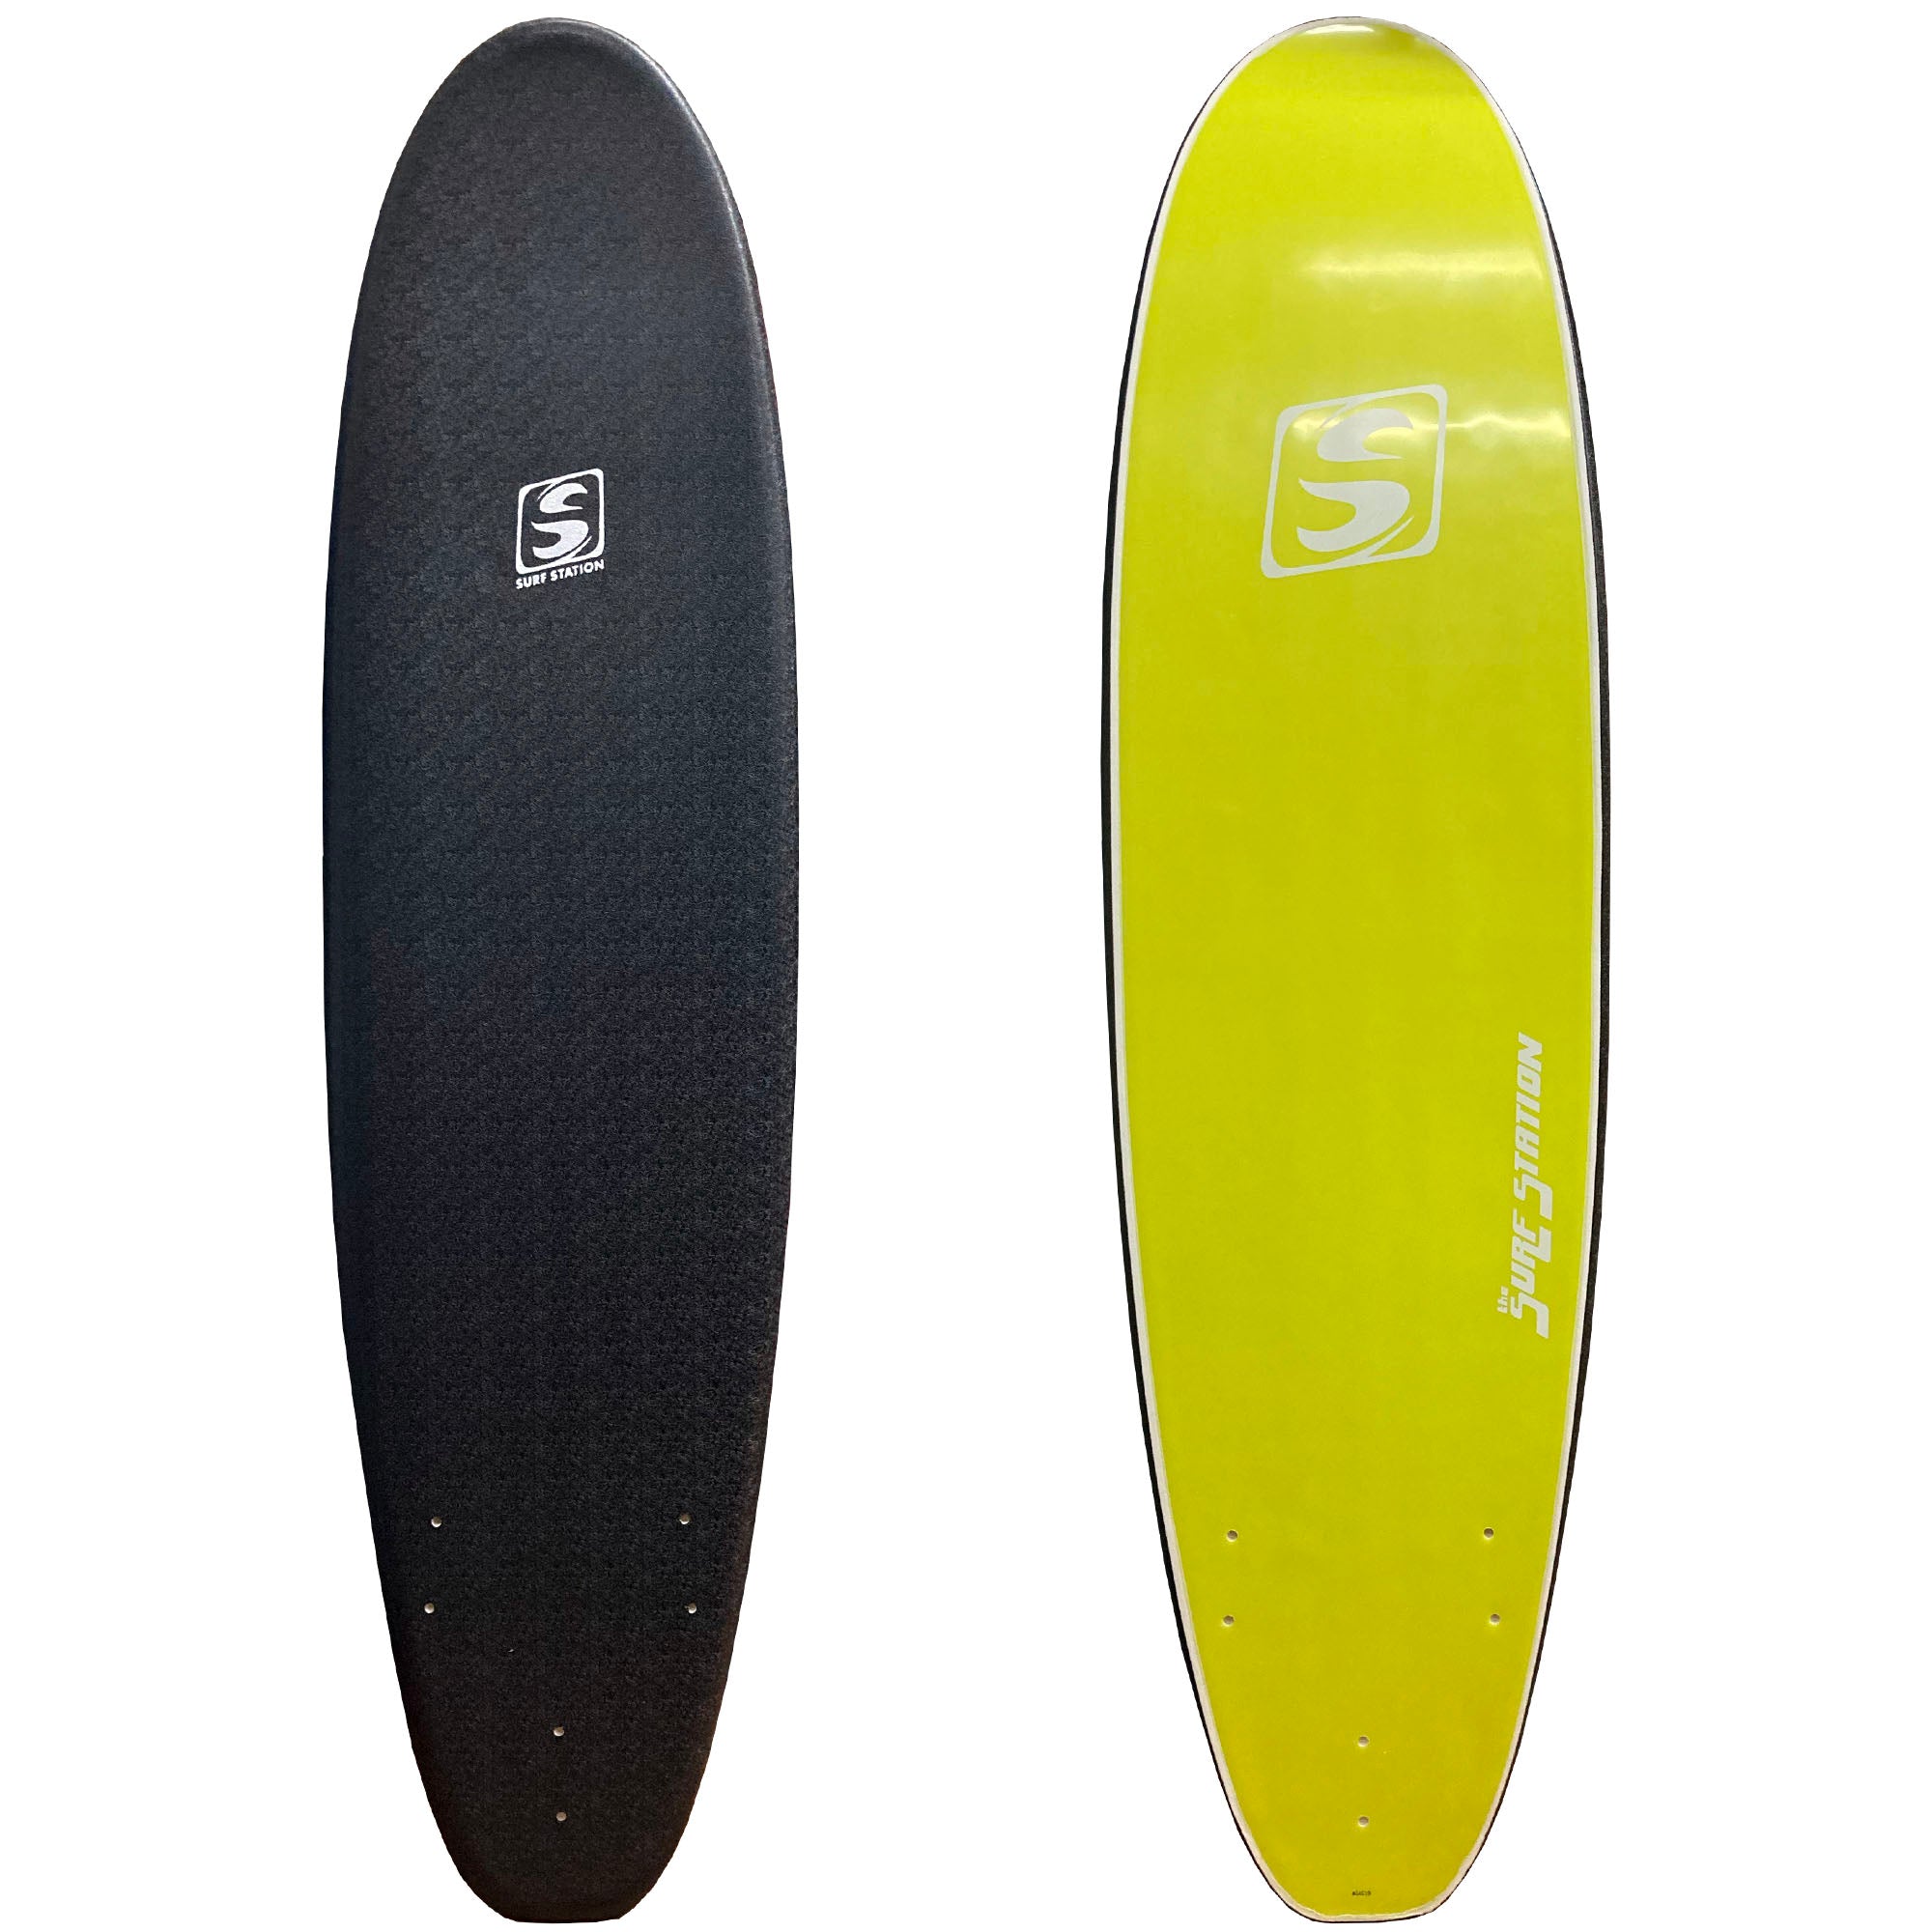 Surf Station Classic 7'0 Soft Surfboard